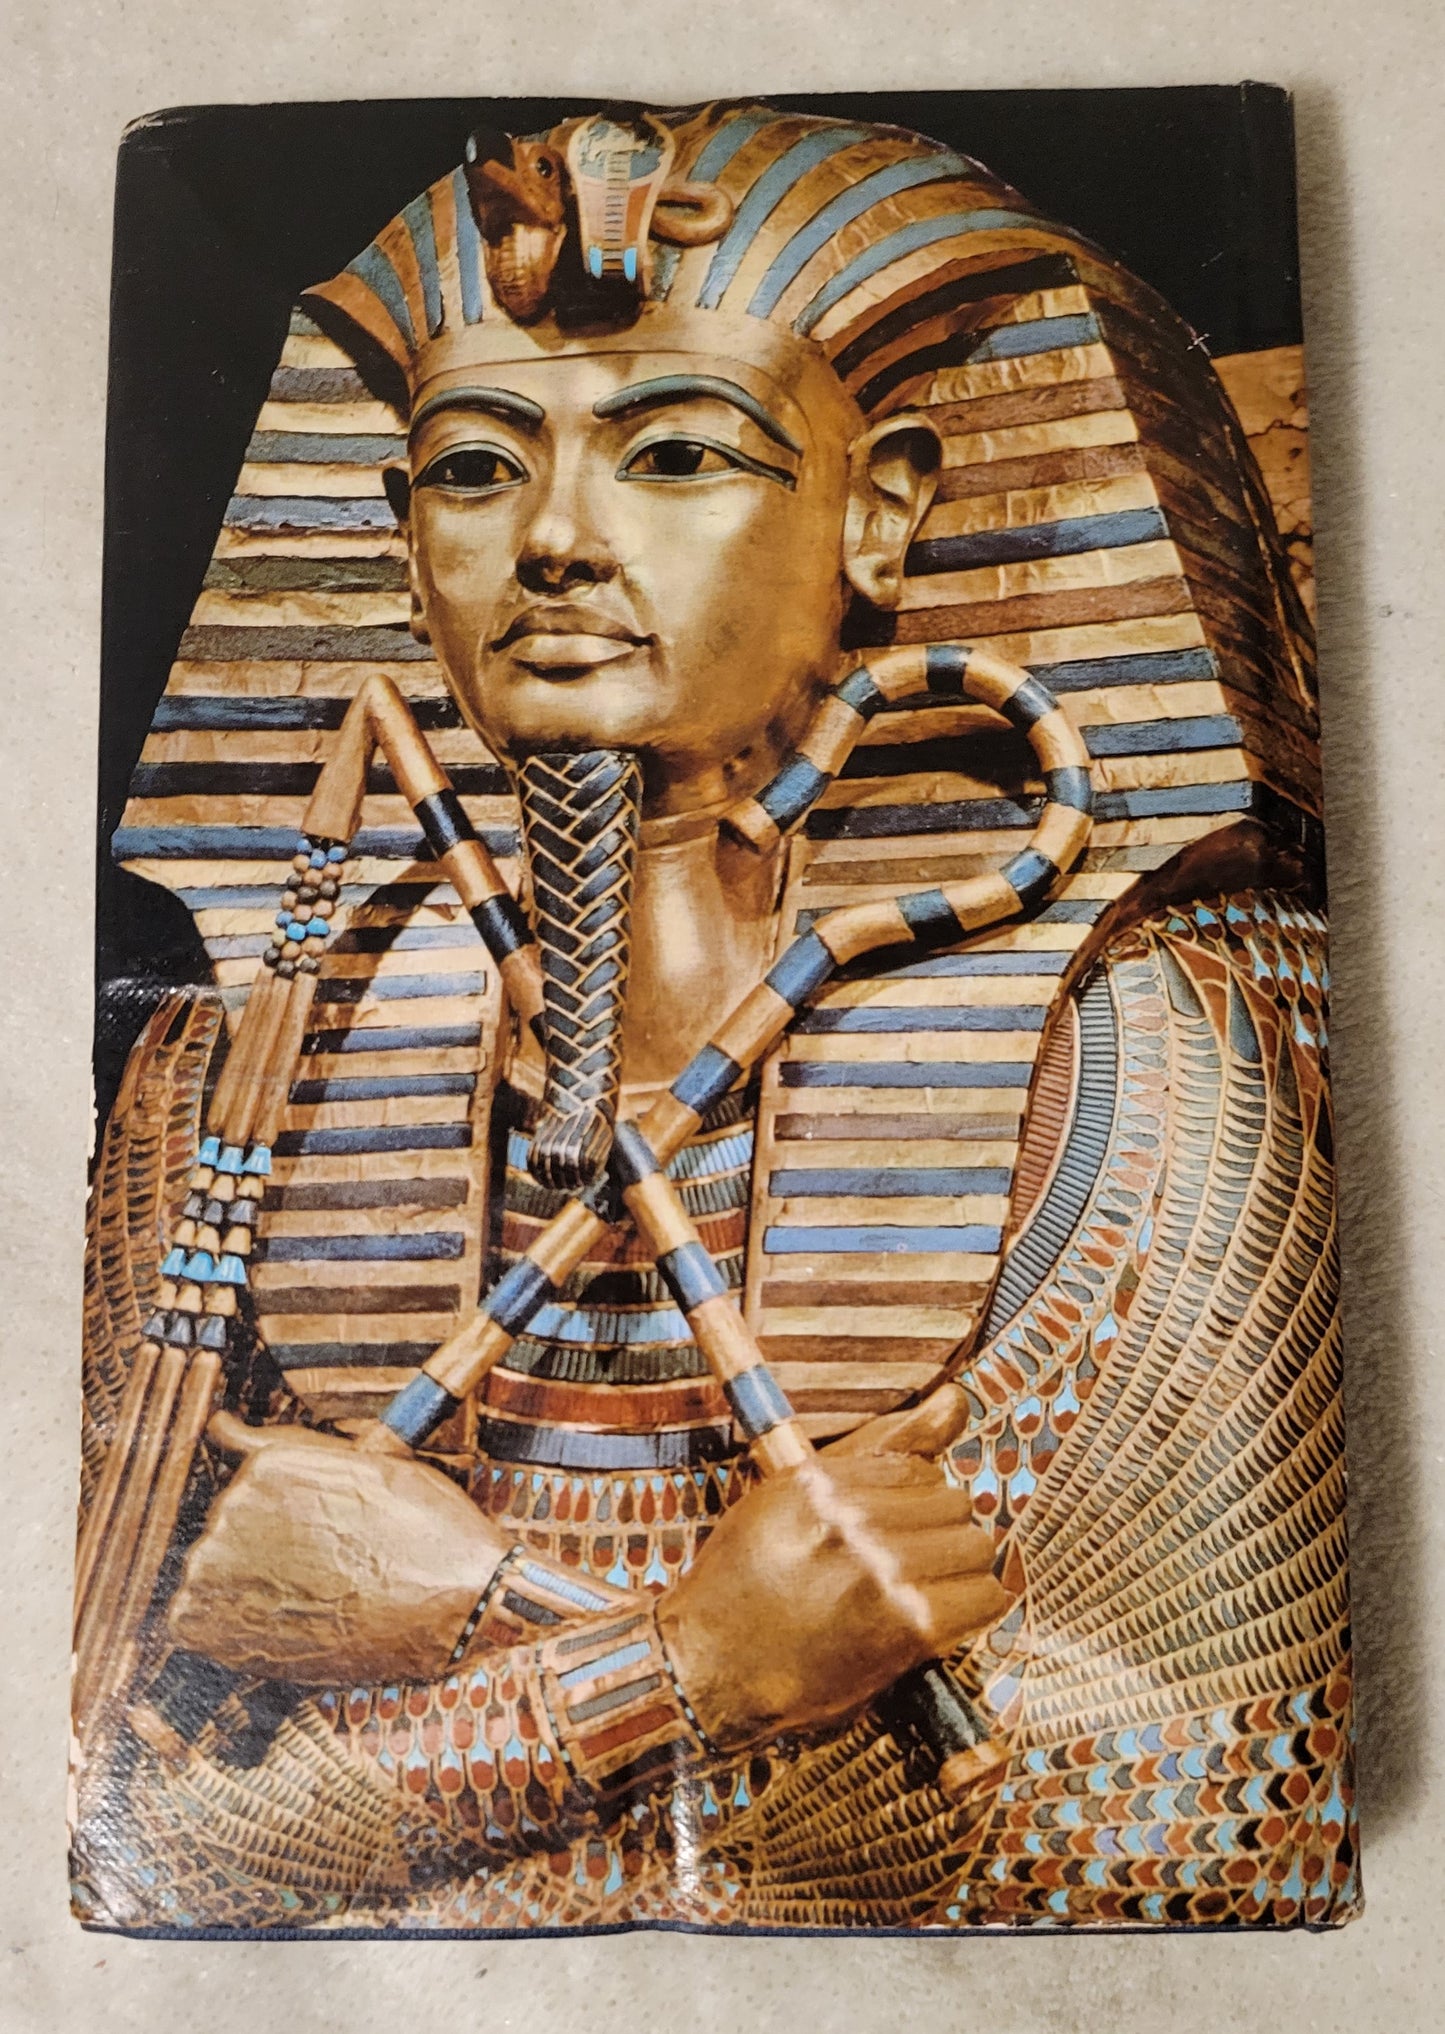 Used book for sale "Tutankhamen: Life and Death of a Pharaoh" by Christiane Deroches-Noblecourt, 1967 World Books edition. Back cover.